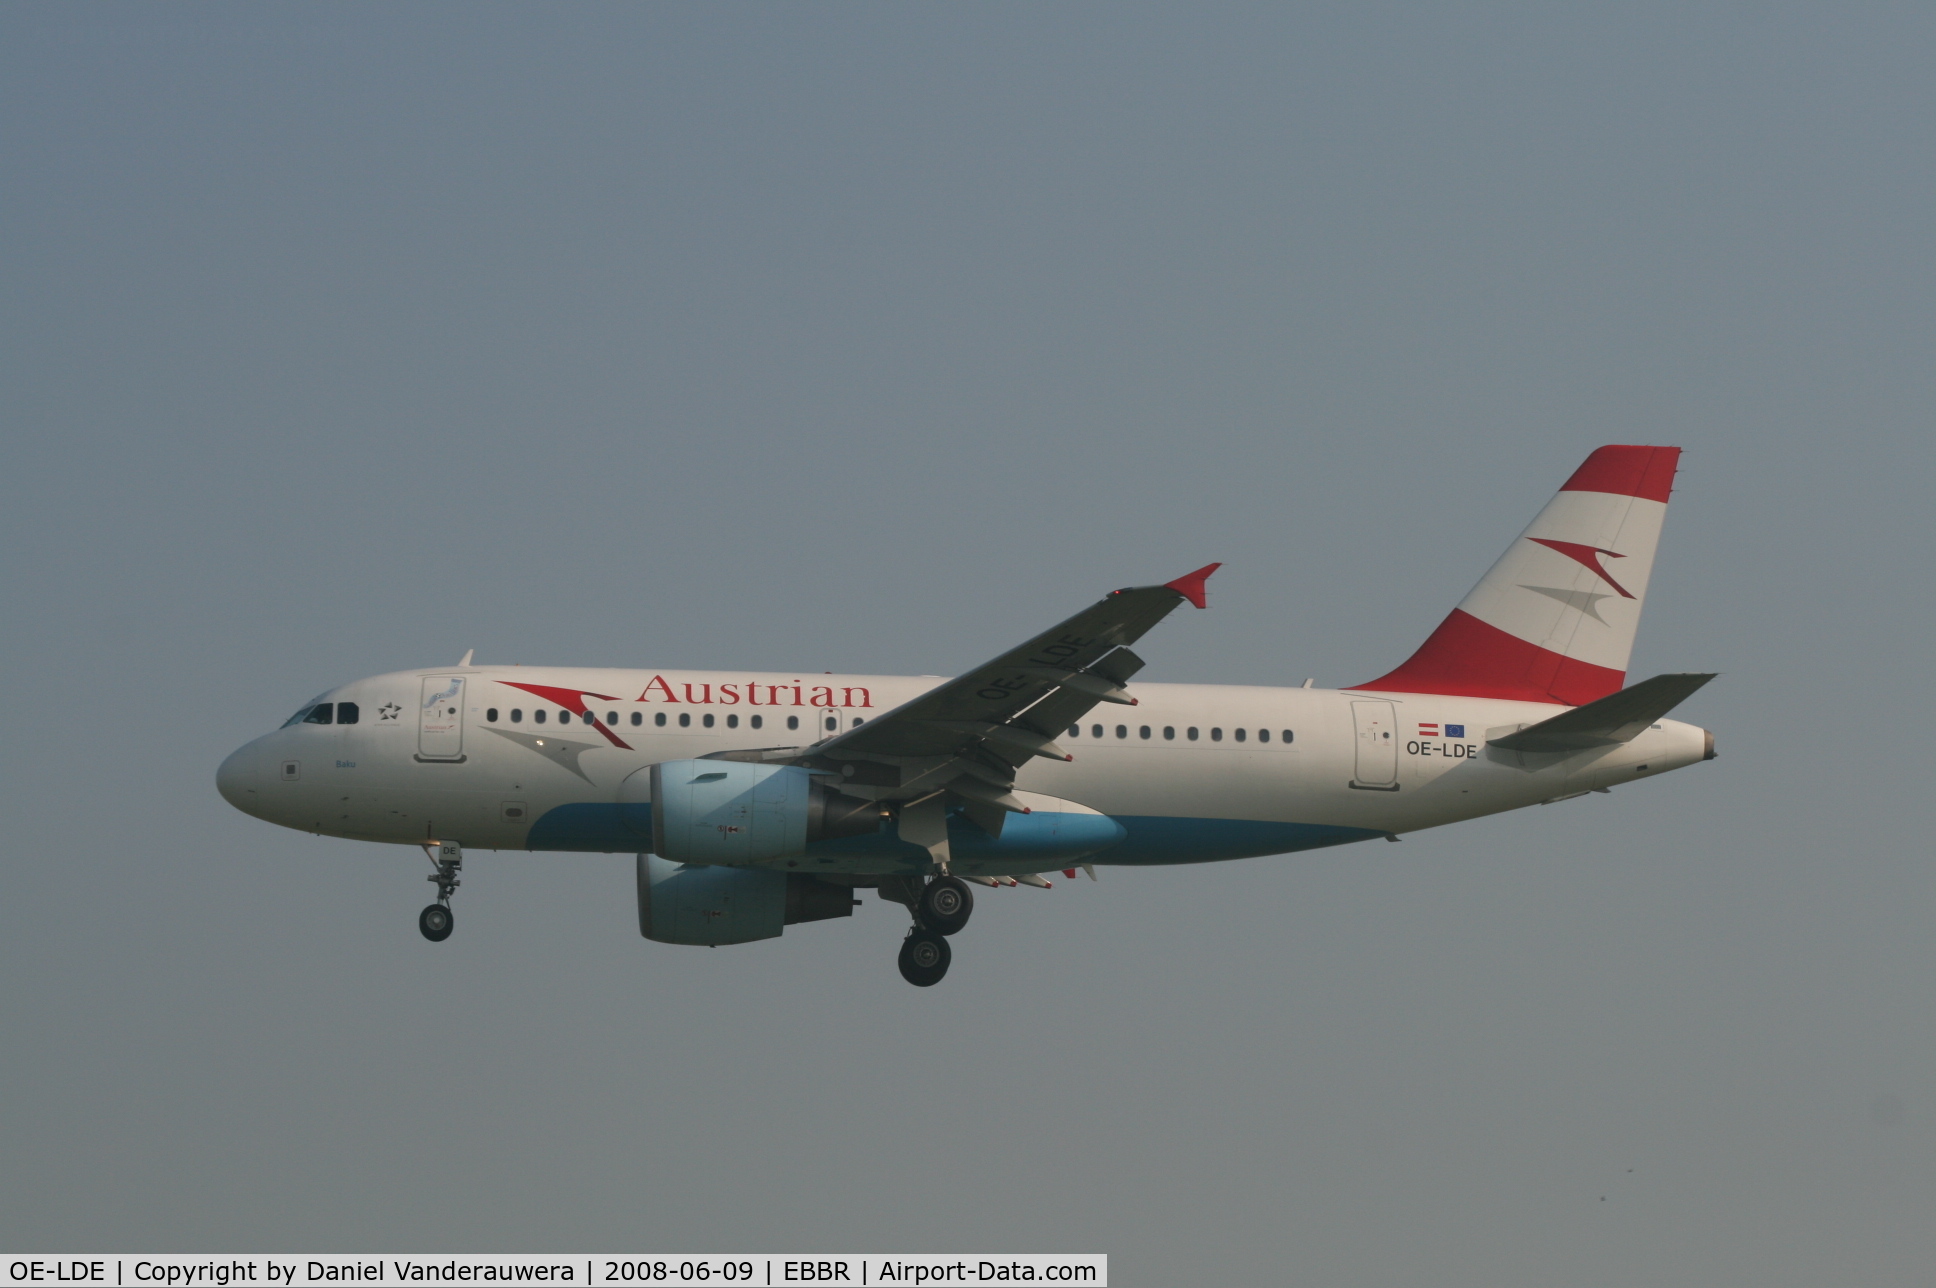 OE-LDE, 2005 Airbus A319-112 C/N 2494, arrival of flight OS351 to rwy 25L